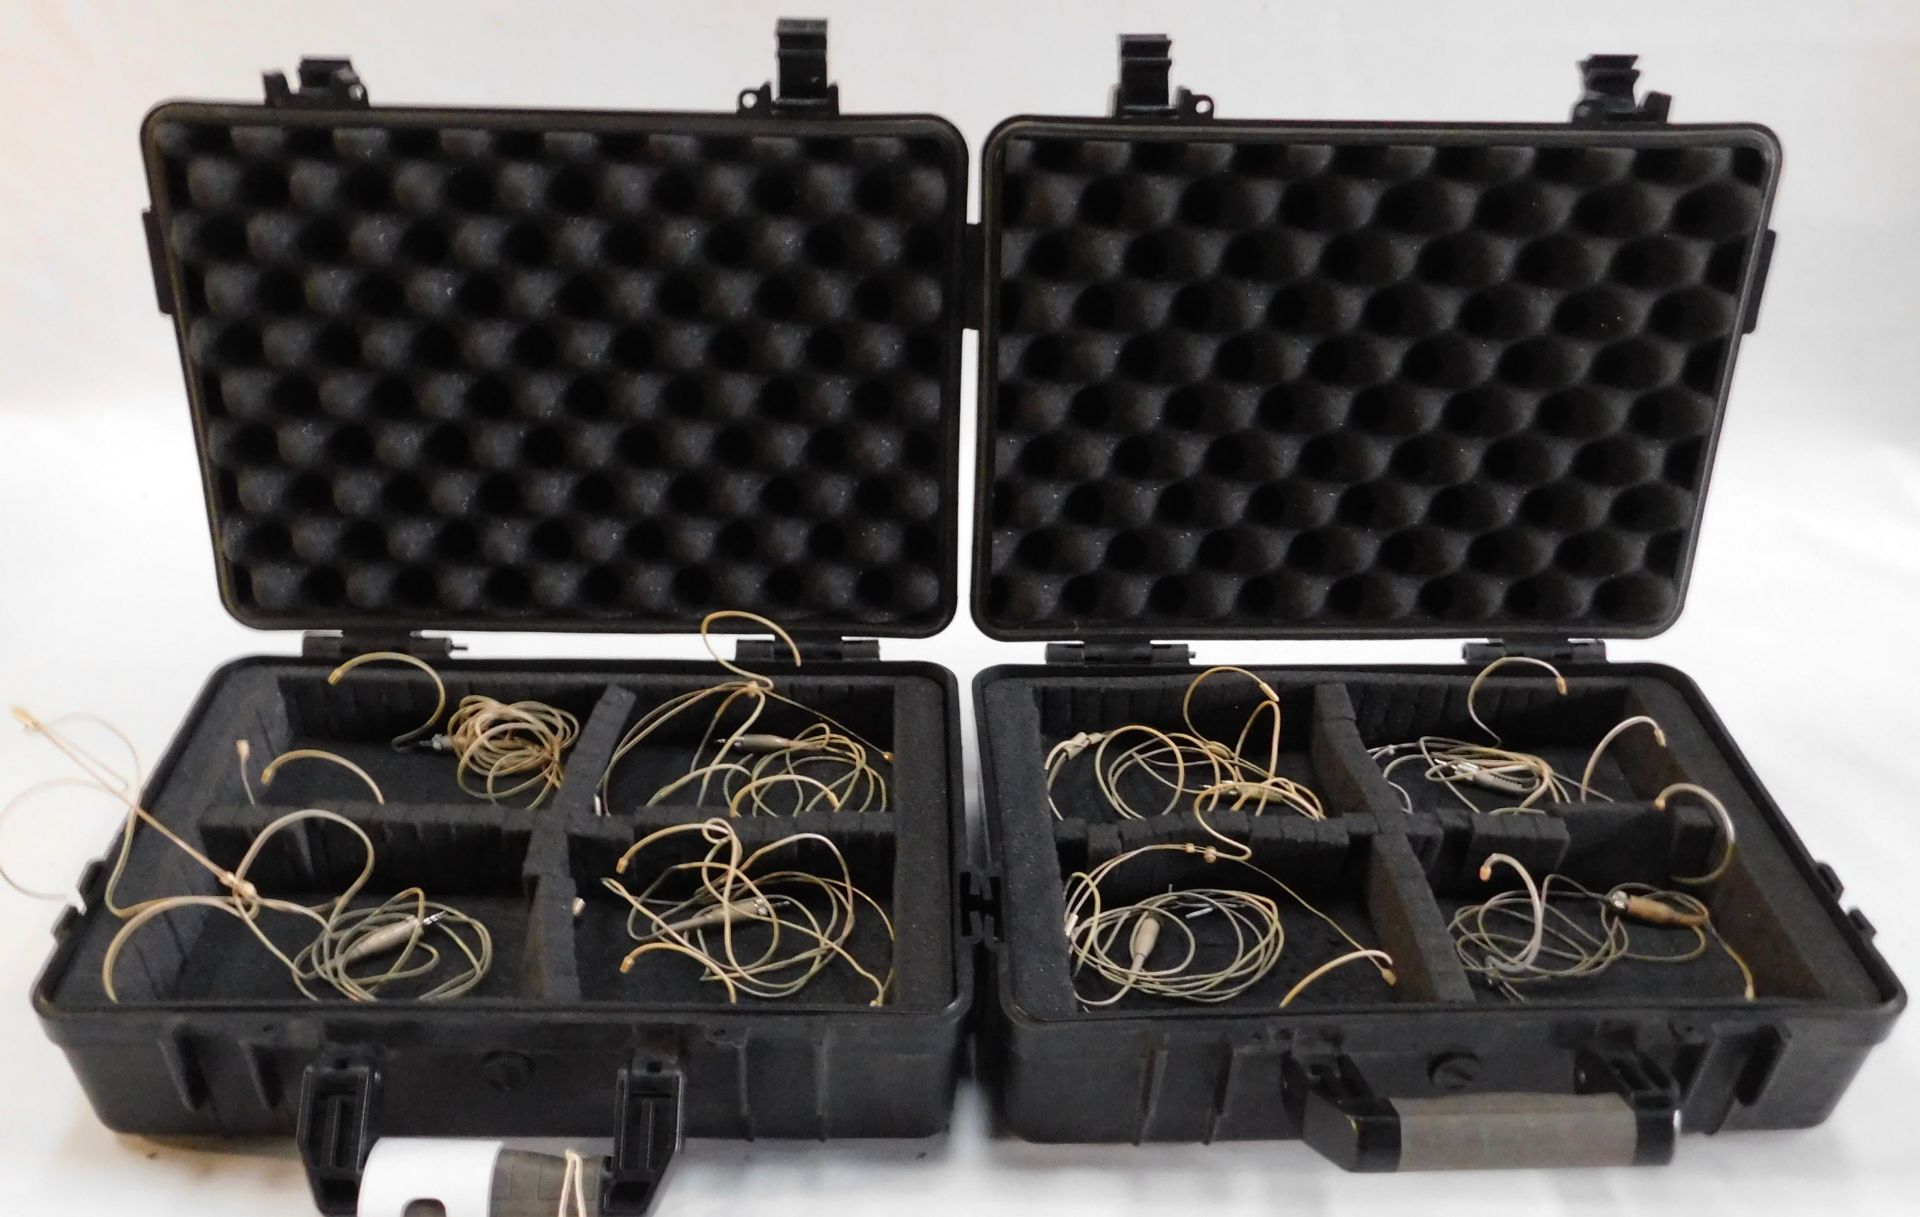 2 Boxes of 4 Headset Microphones (Location: Brentwood. Please Refer to General Notes)